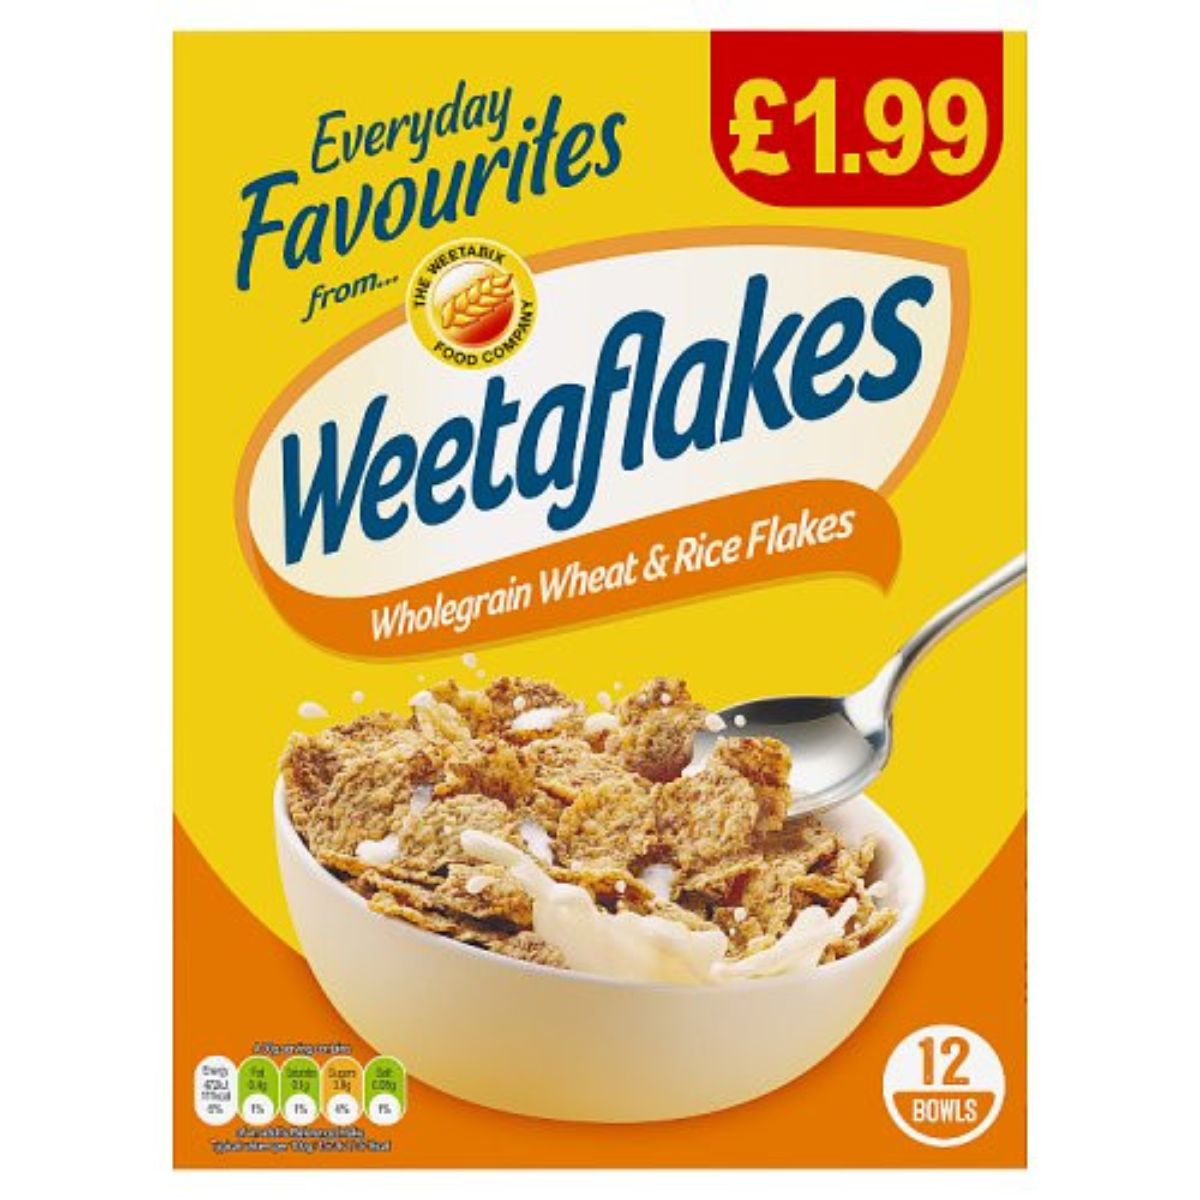 A box of Weetabix cereal with a spoon.